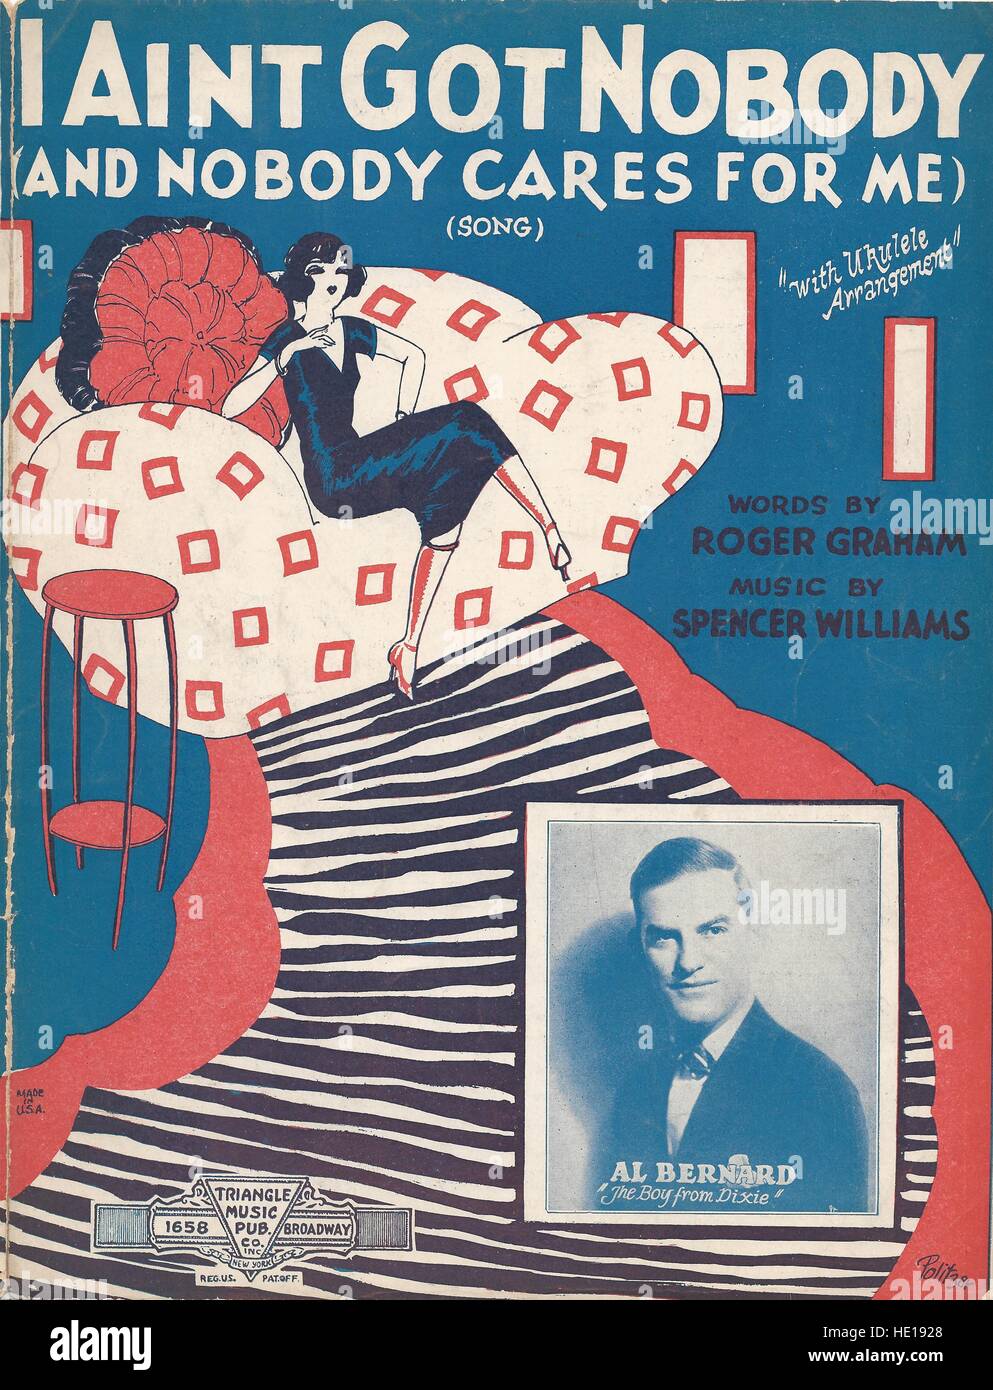 'I Ain't Got Nobody (And Nobody Cares for Me)' 1925 Sheet Music Cover Stock Photo